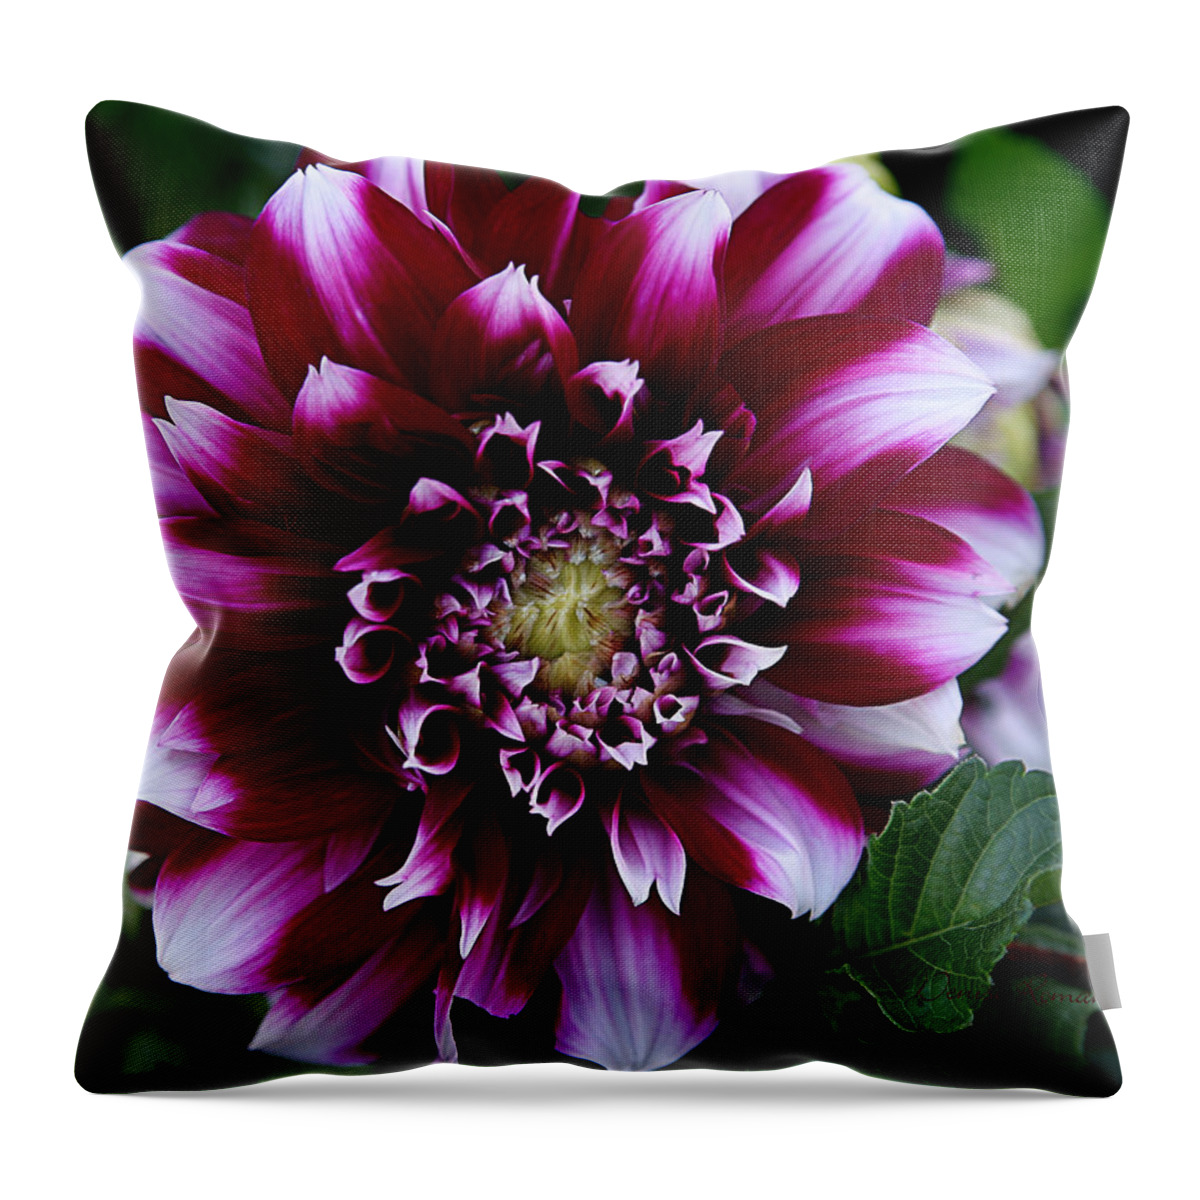 Flower Throw Pillow featuring the photograph Dahlia by Denise Romano